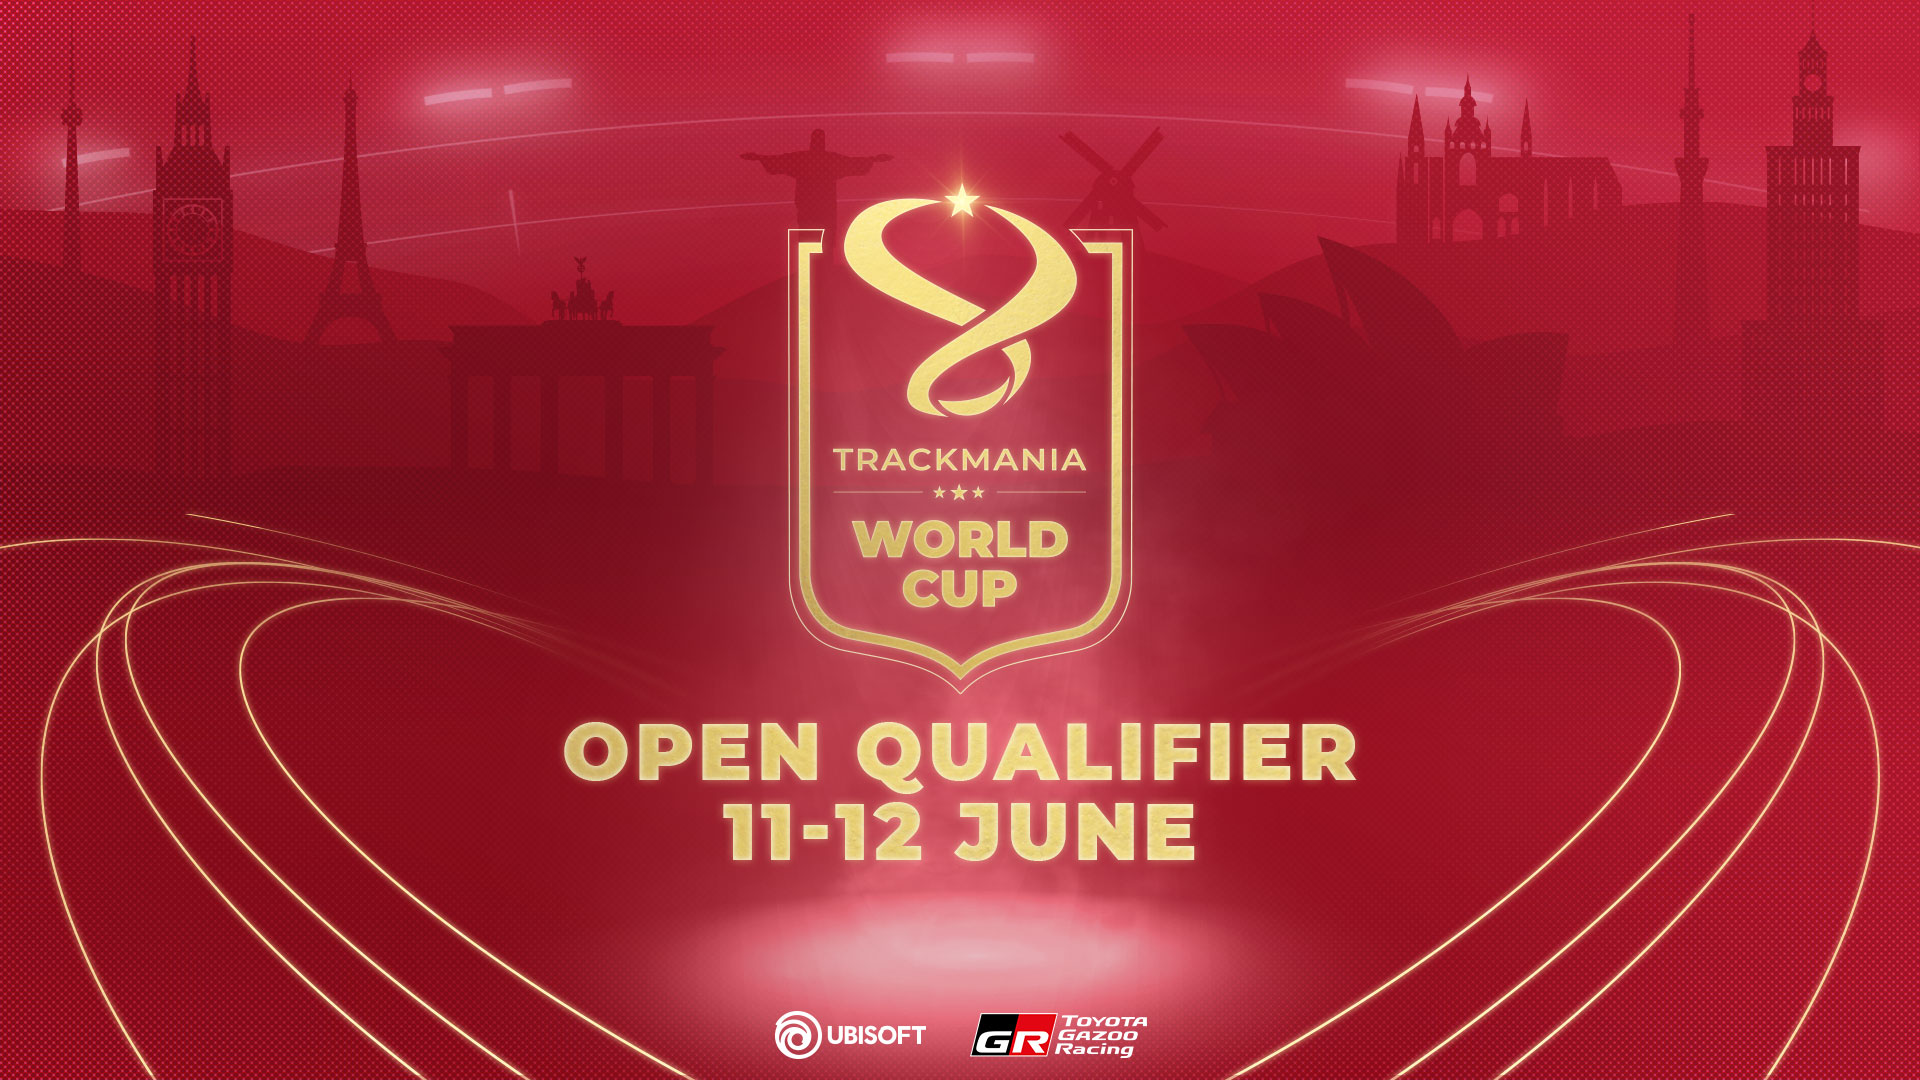 Try to qualify for the Trackmania Grand League World Cup 2022!